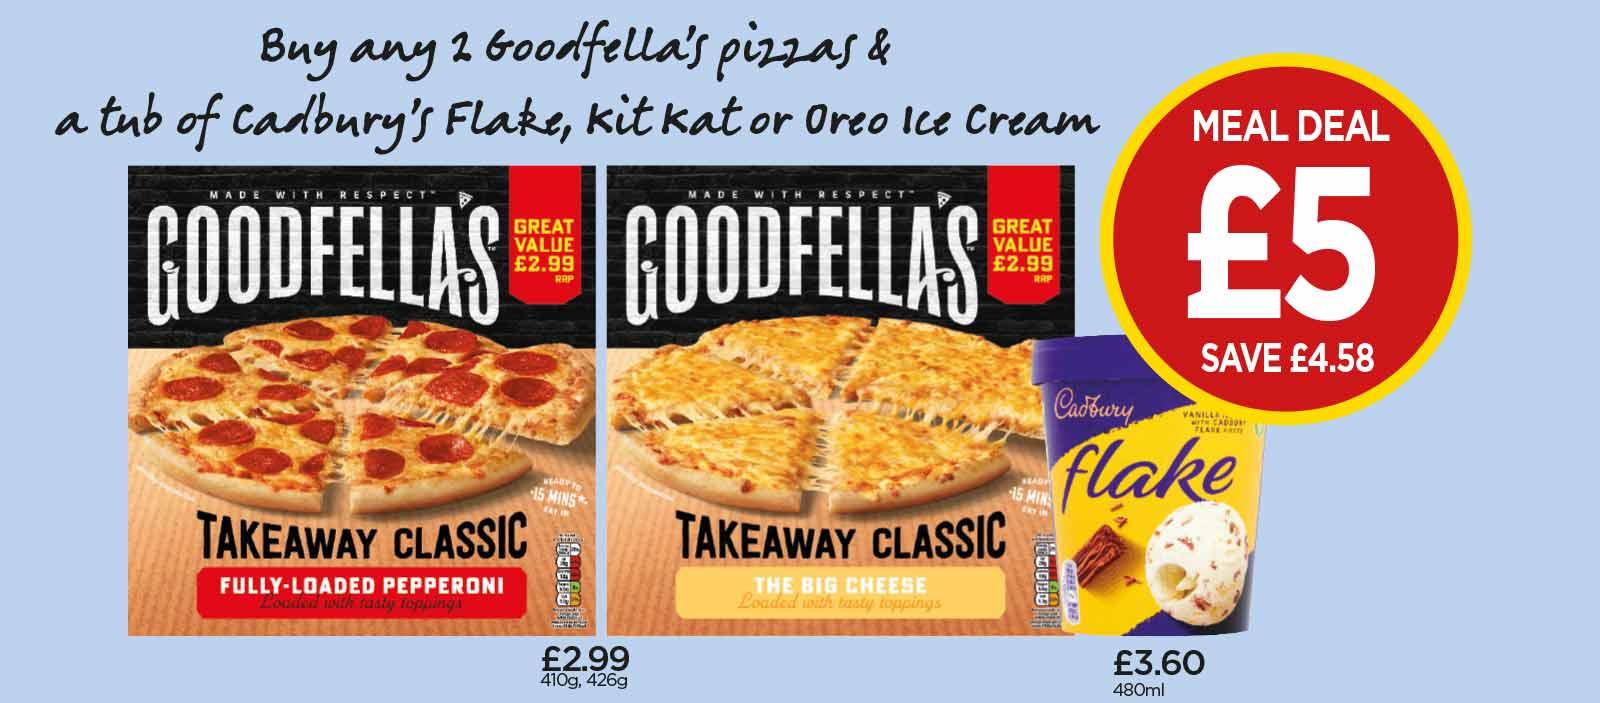 FROZEN MEAL DEAL: Goodfella’s Pepperoni Pizza, Cheese Pizza, Cadbury Flake Ice Cream Tub - £5 at Budgens